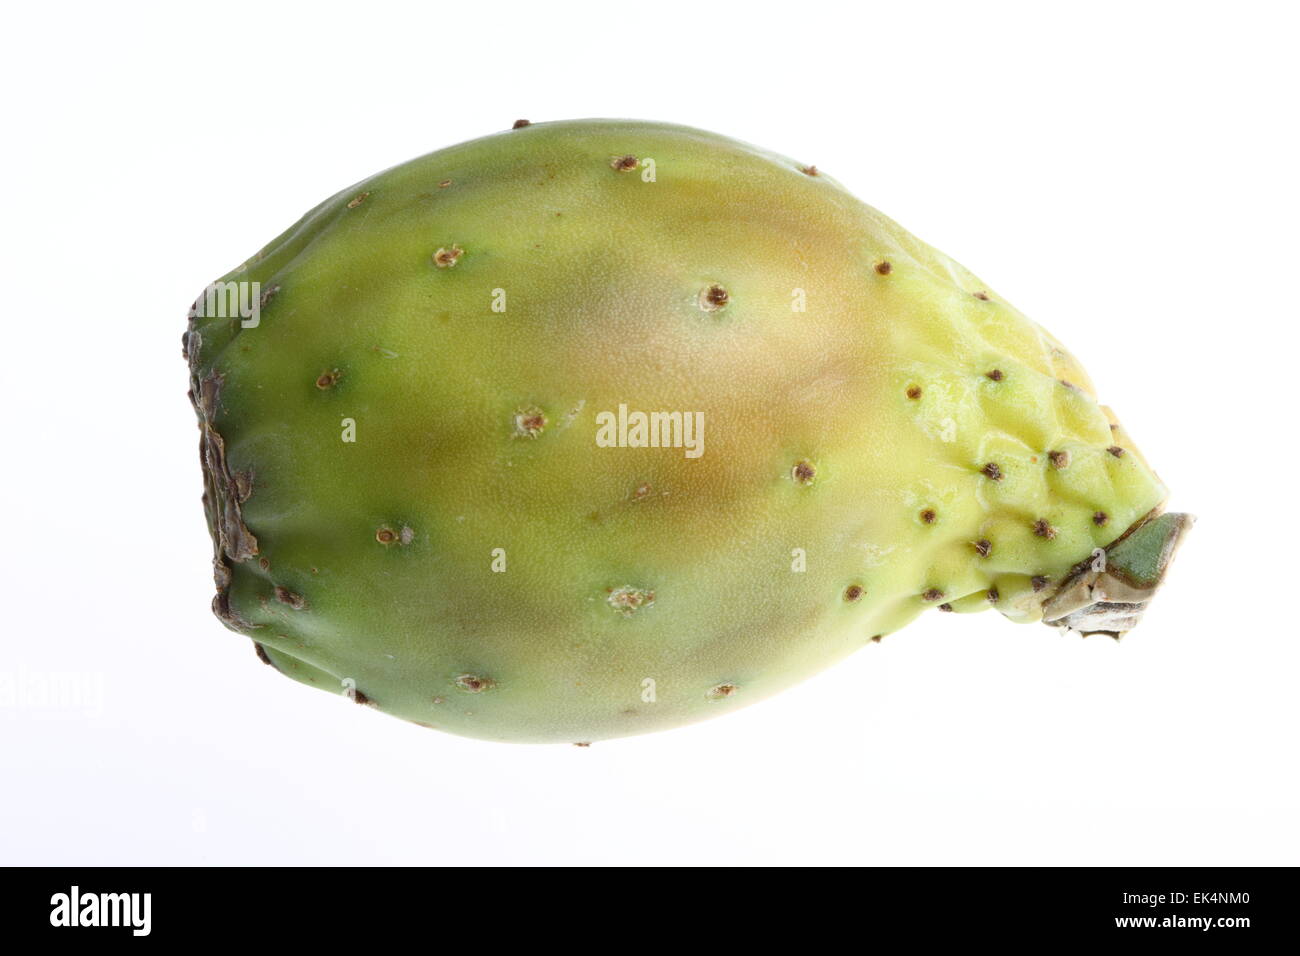 Tropical fruits, Prickly pear, Opuntia ficus-indica, Stock Photo